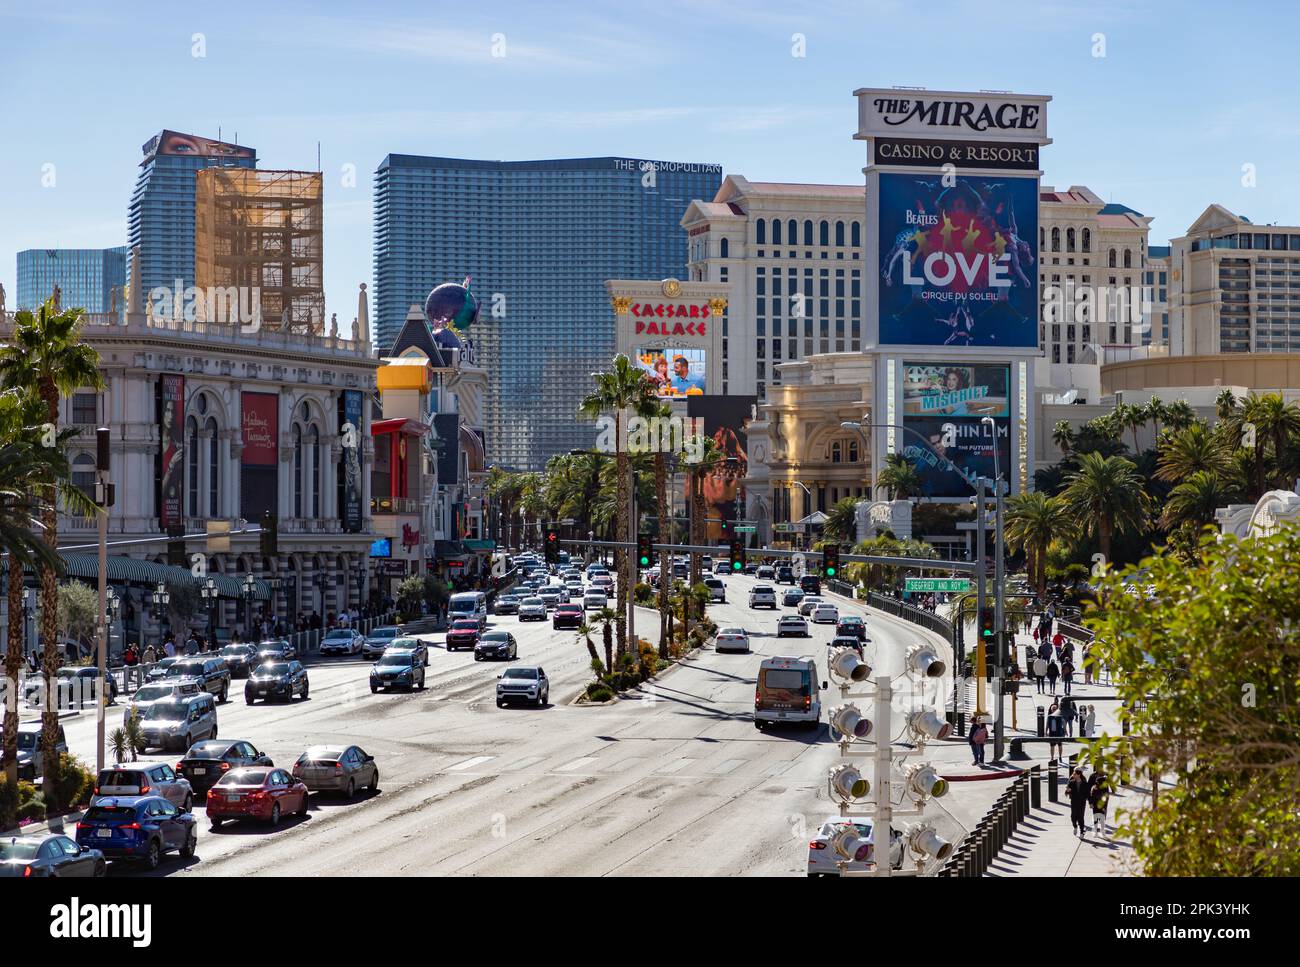 A picture of the Las Vegas Boulevard South with traffic, palm trees and casinos on both sides of it. Stock Photo